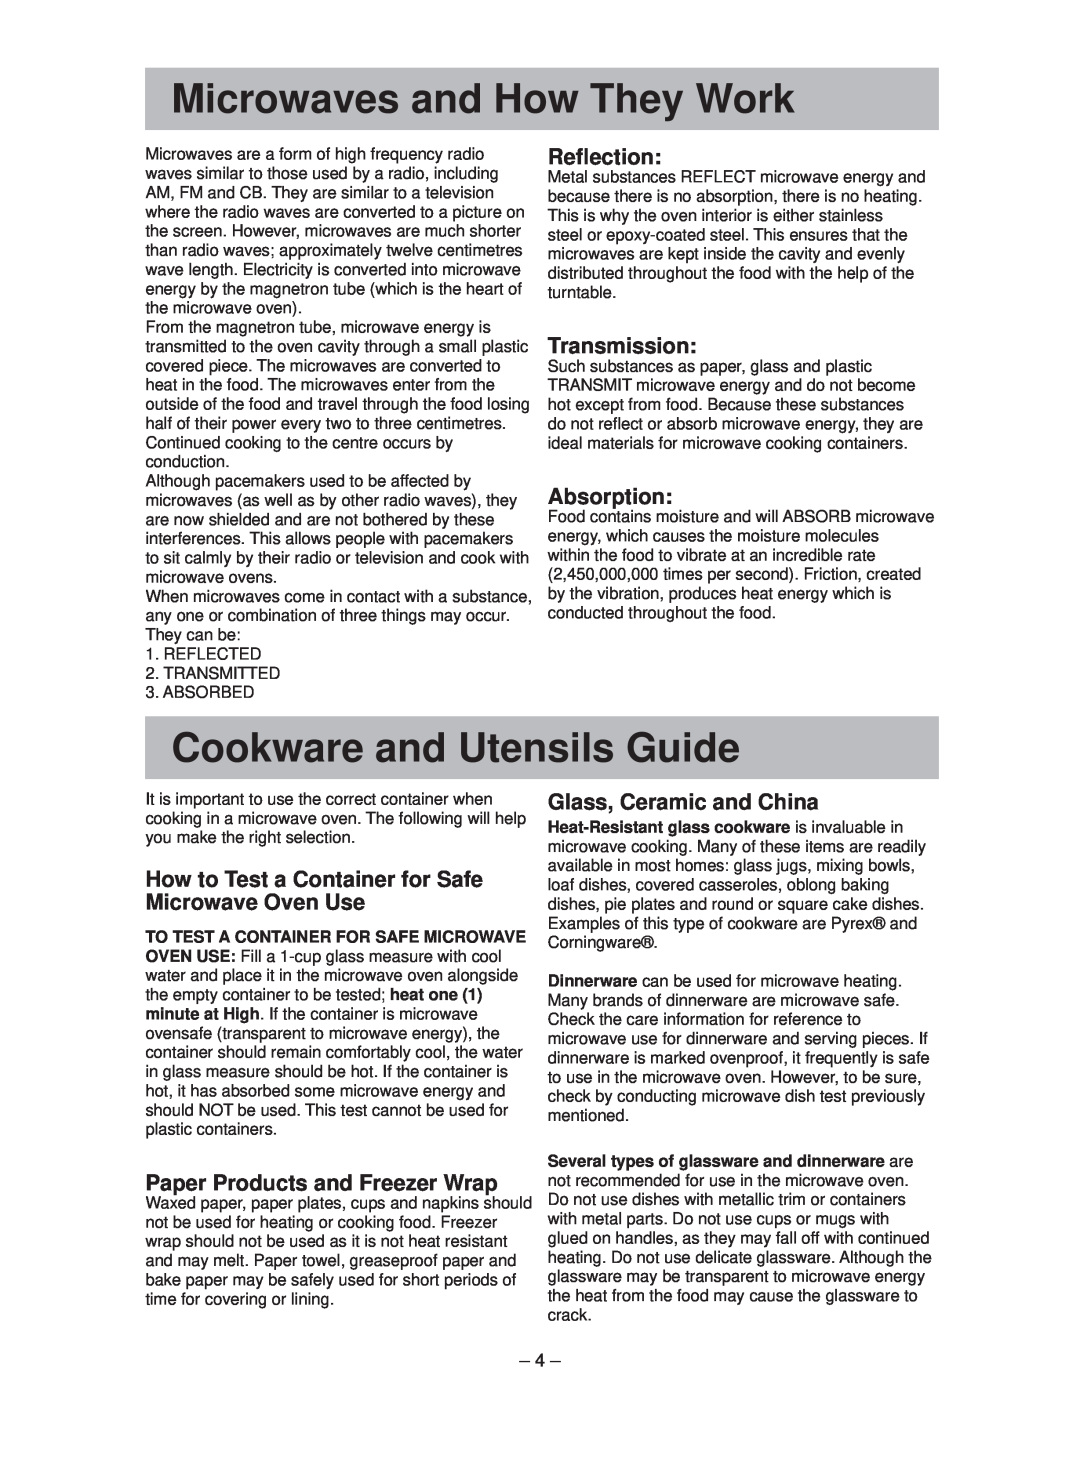 Panasonic NN-ST641W manual Microwaves and How They Work, Cookware and Utensils Guide, Reﬂection, Transmission, Absorption 